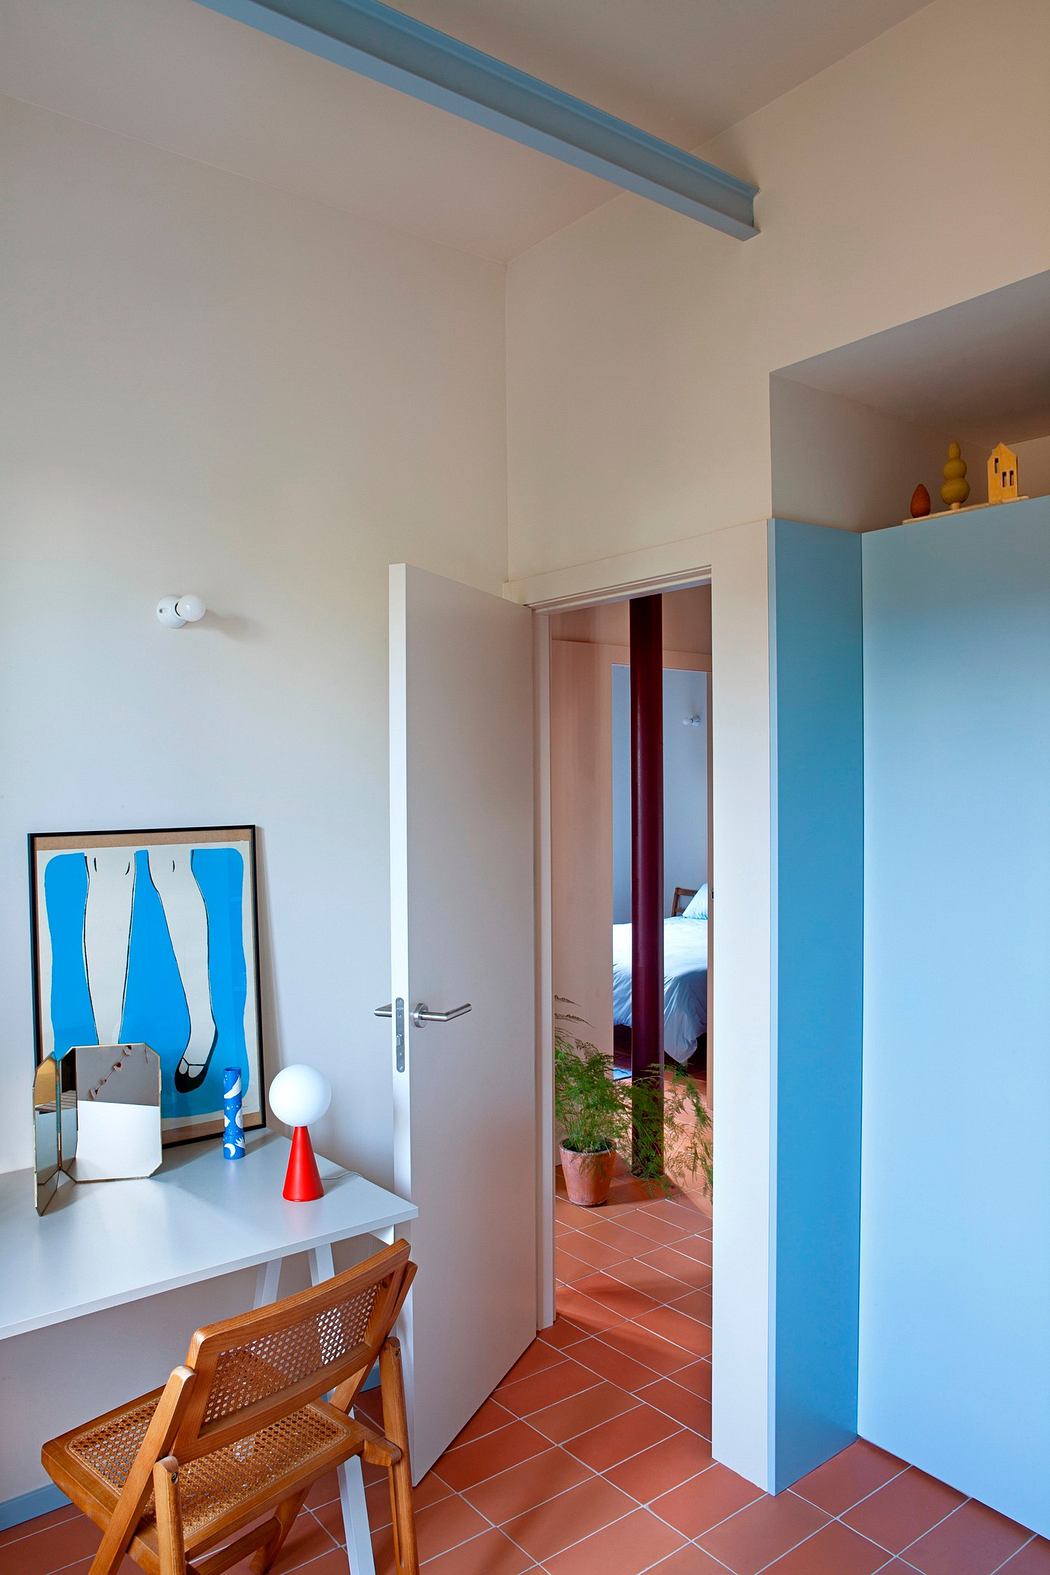 Small room with terra-cotta tiles, white walls, a blue partition, and